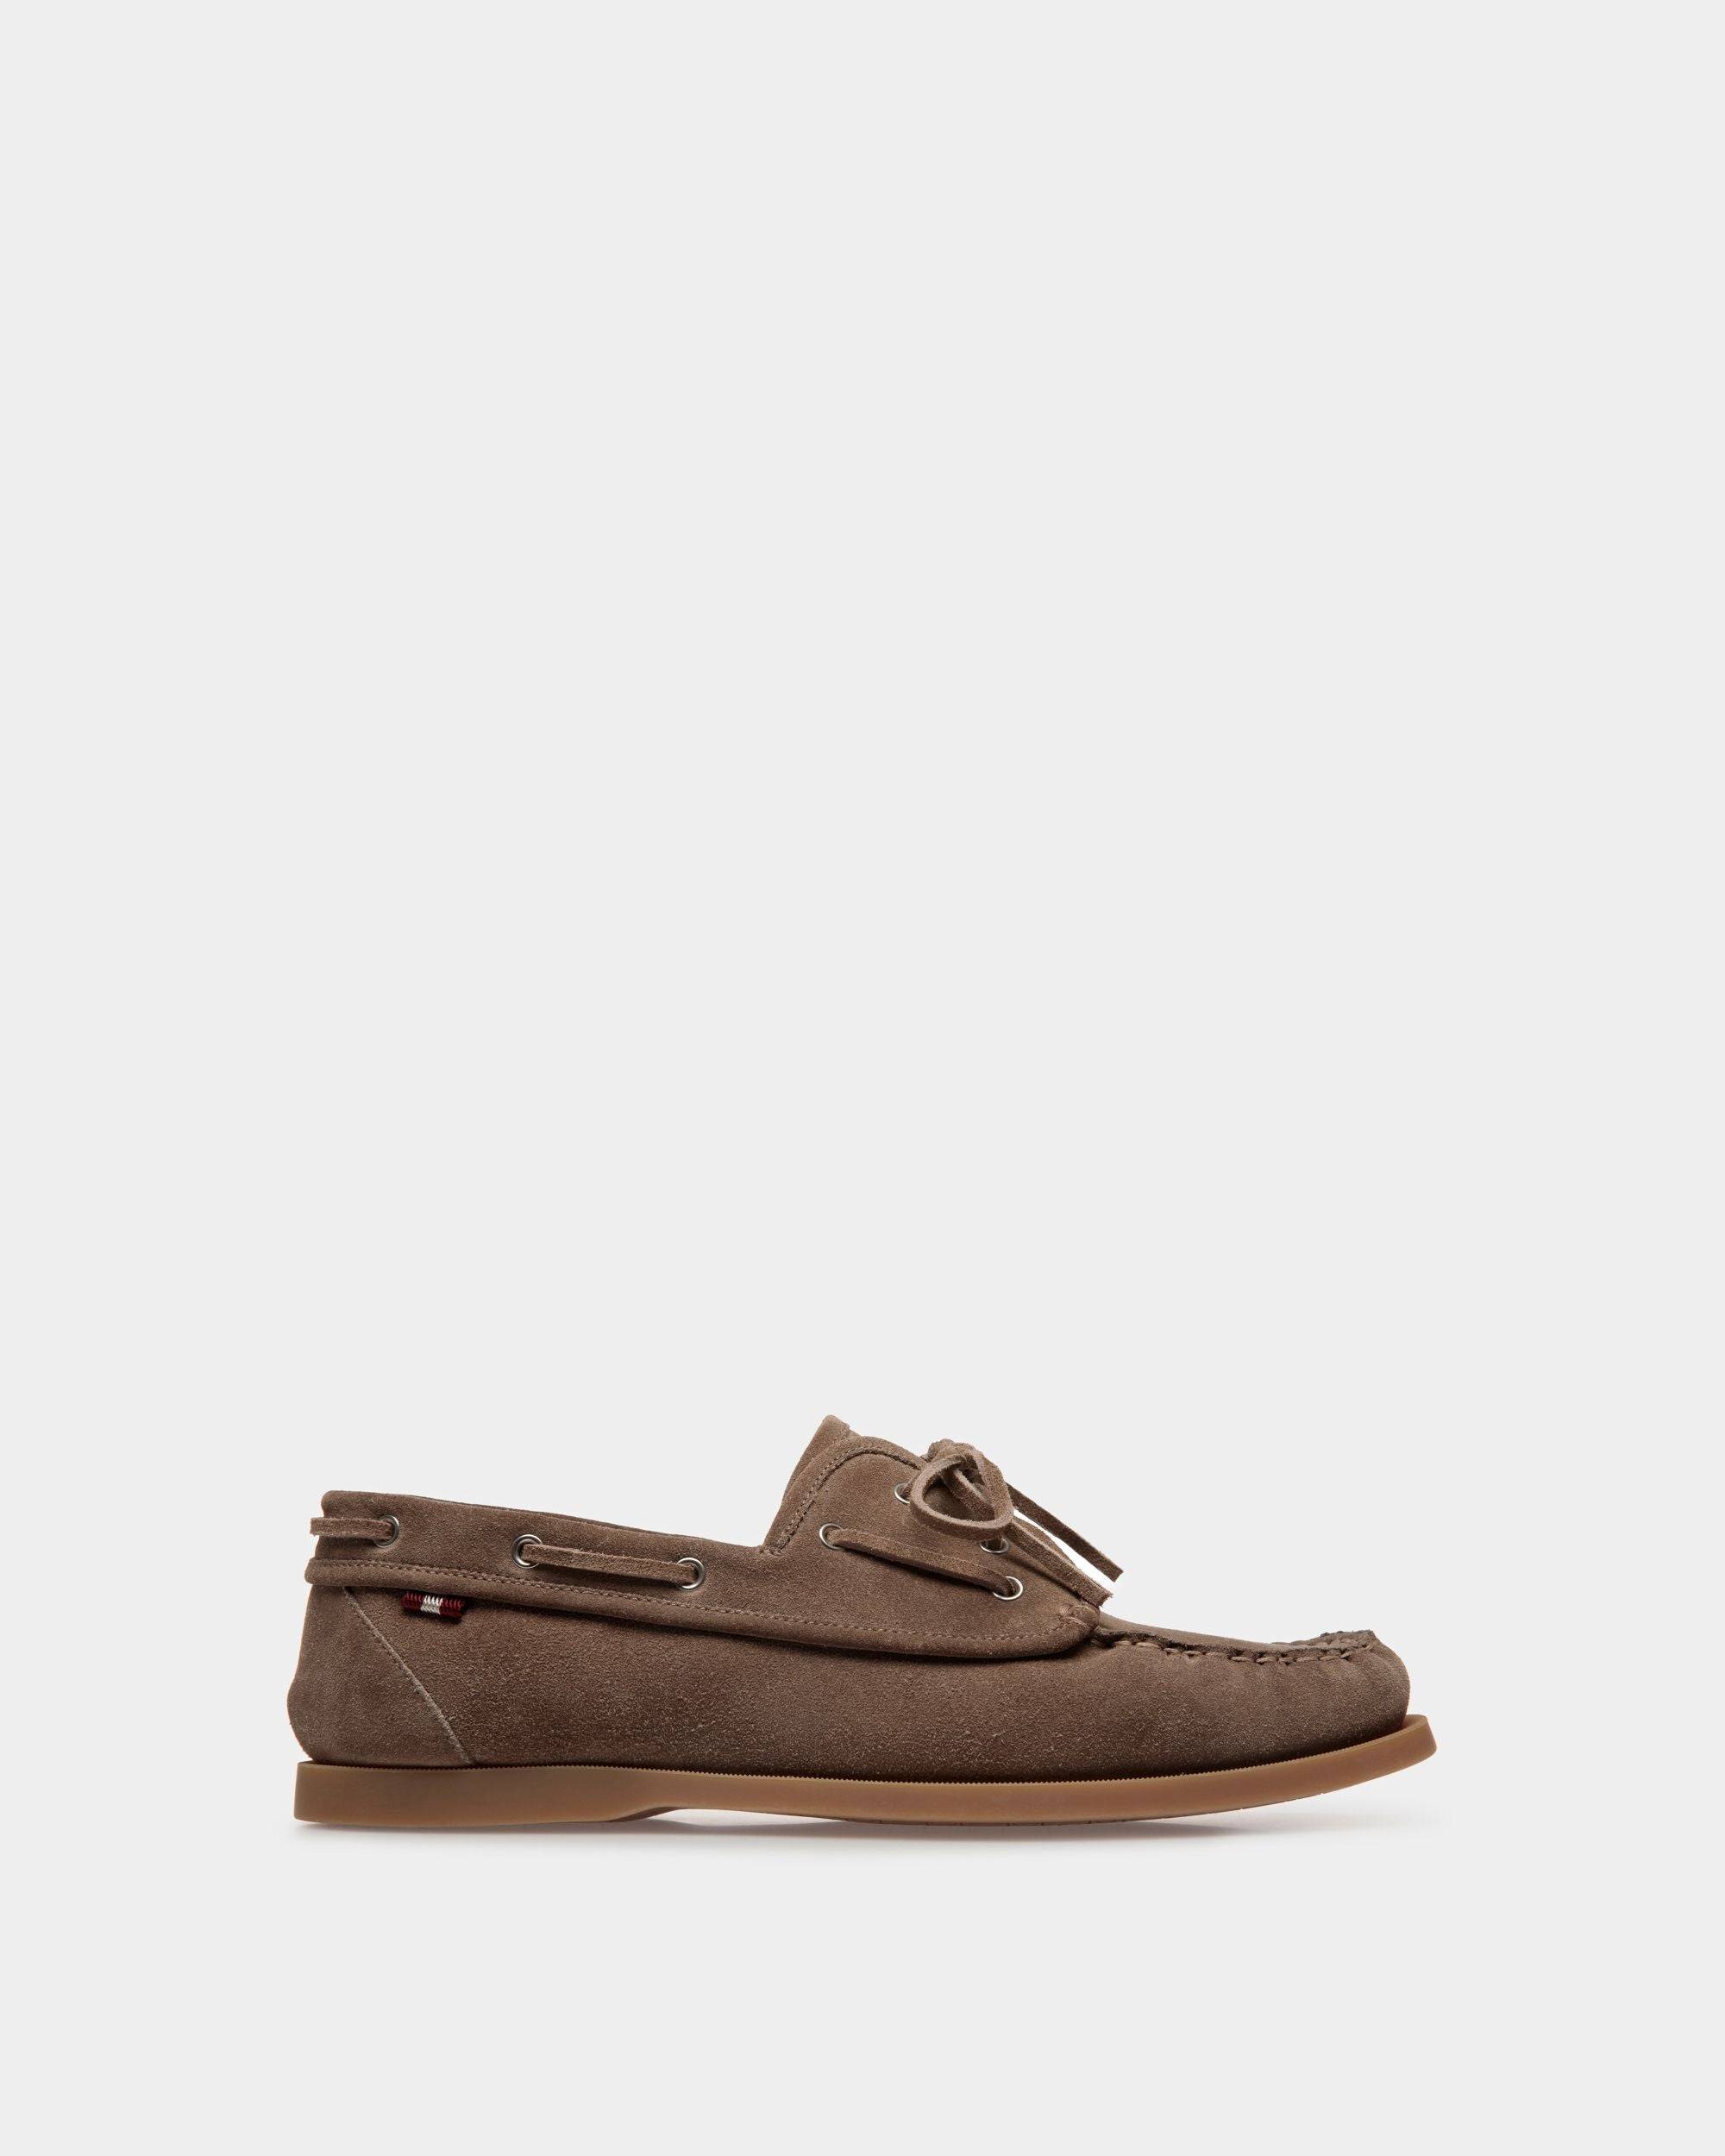 Men's Nelson Loafer in Beige Suede Leather | Bally | Still Life Side